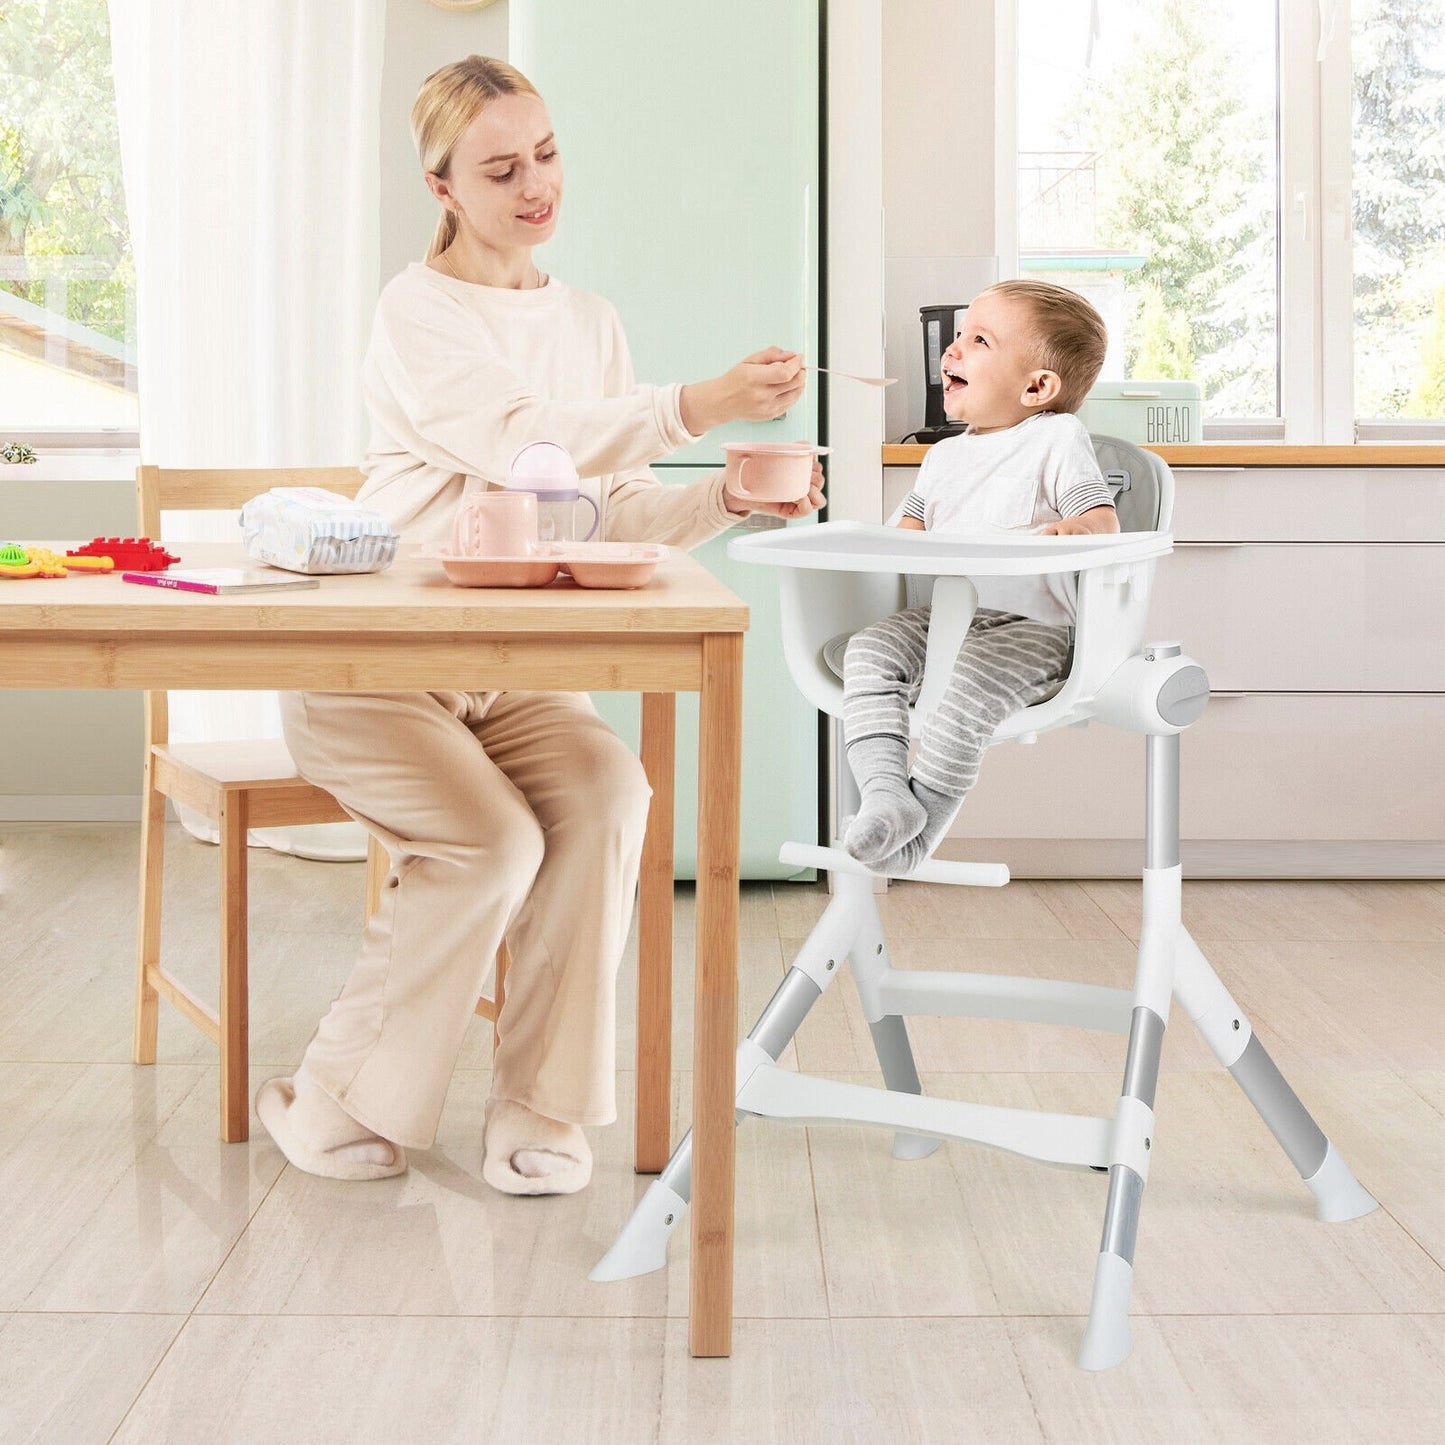 4-in-1 Convertible Baby High Chair with Aluminum Frame, Gray